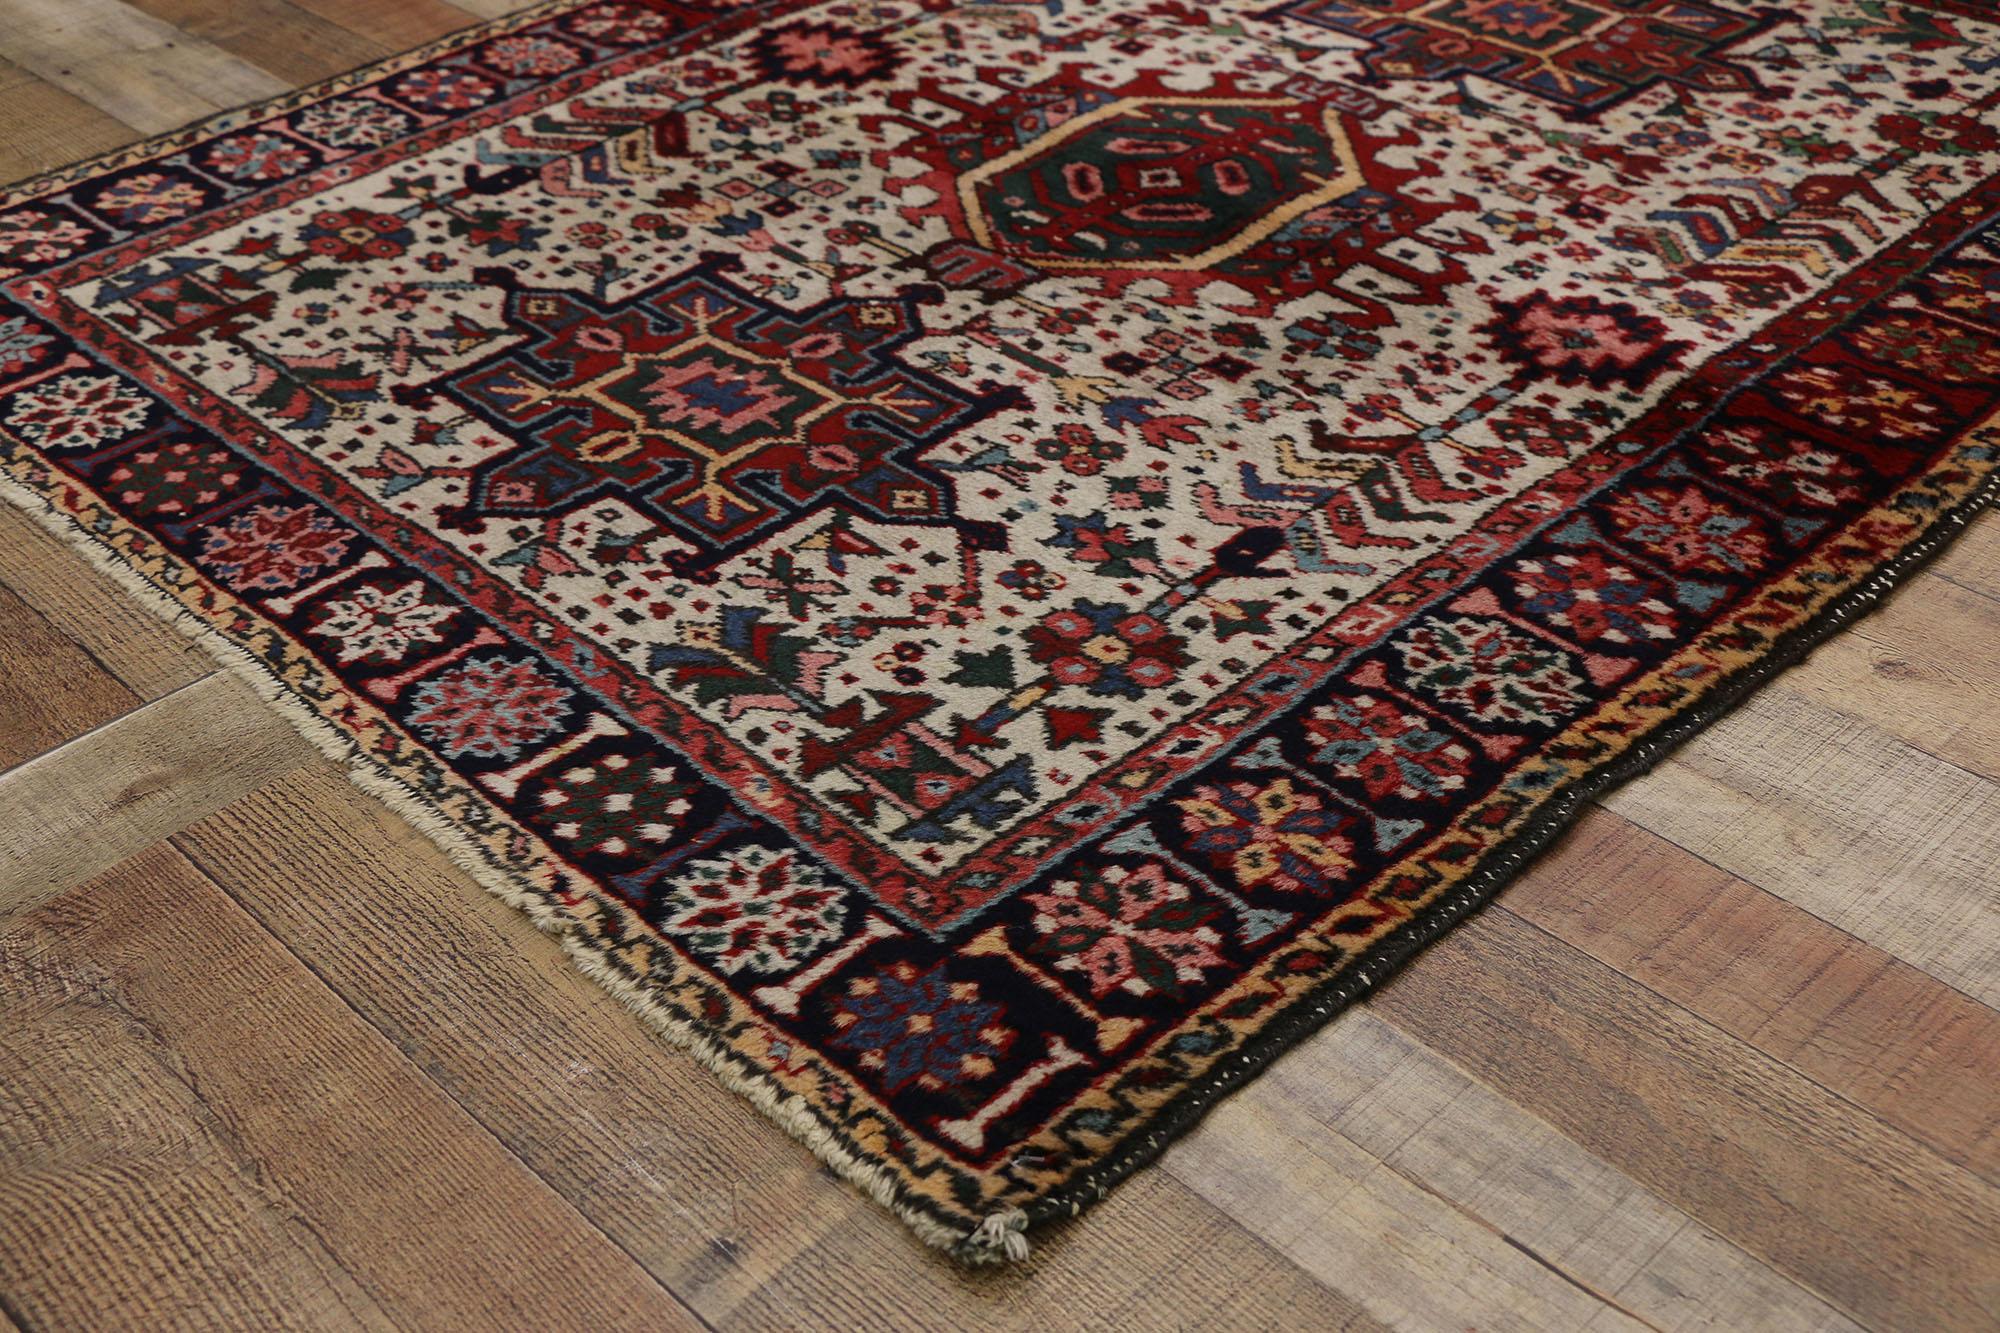 Antique Persian Heriz Karaja Rug with Mid-Century Modern Style, Accent Rug In Good Condition For Sale In Dallas, TX